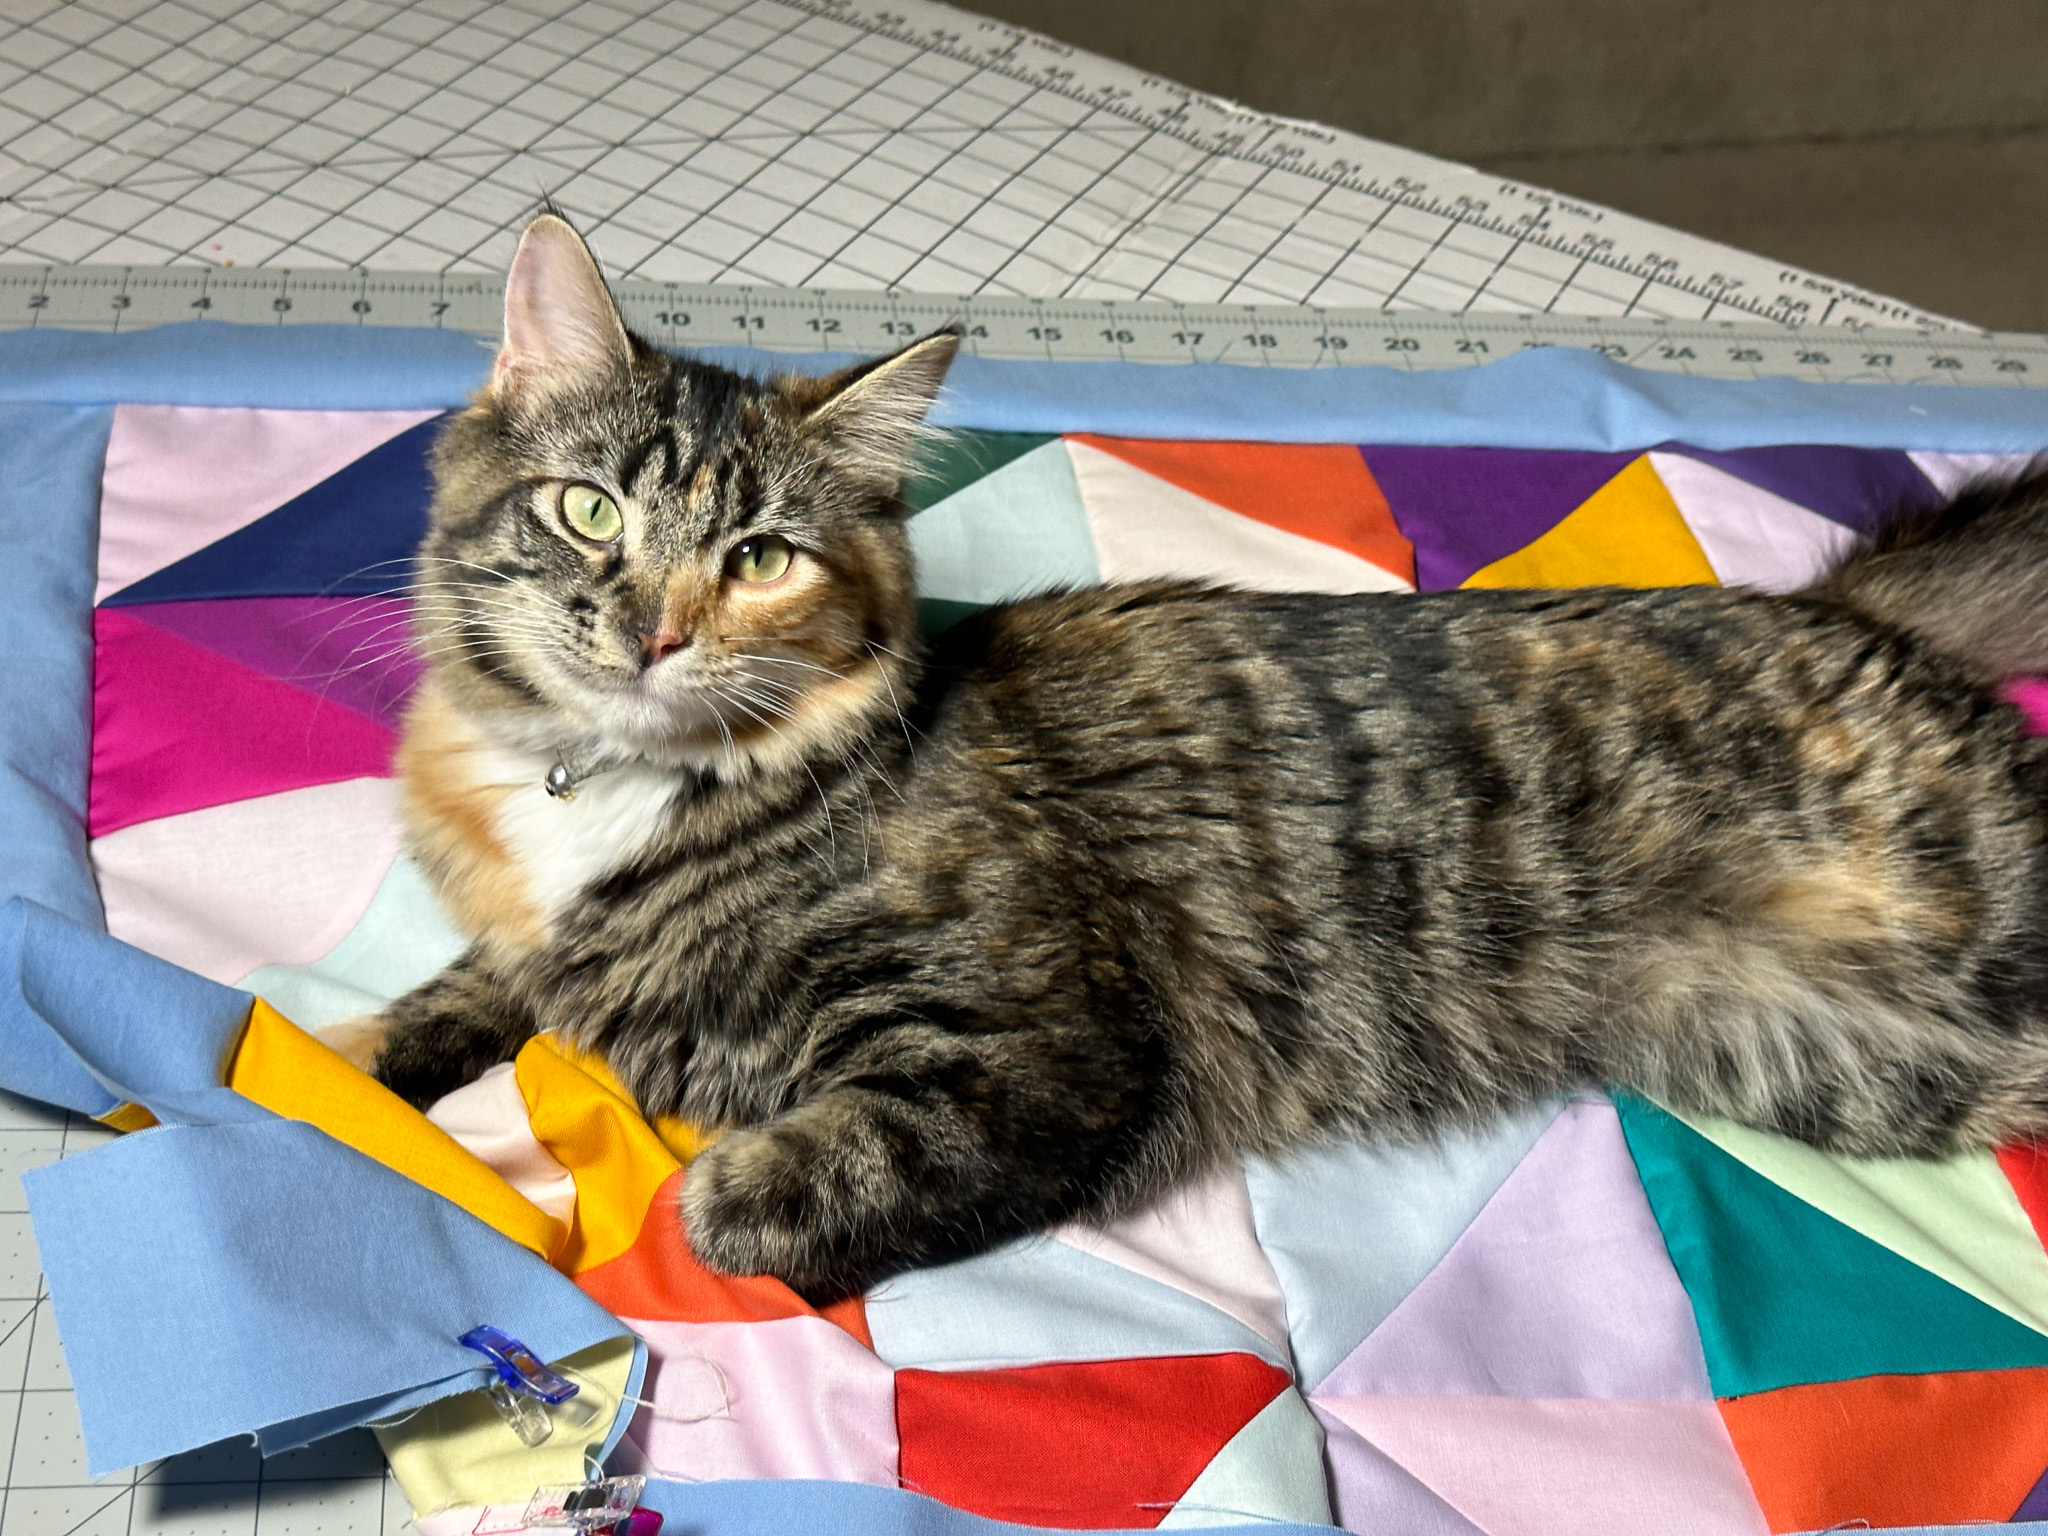 Althea helping with the quilt border